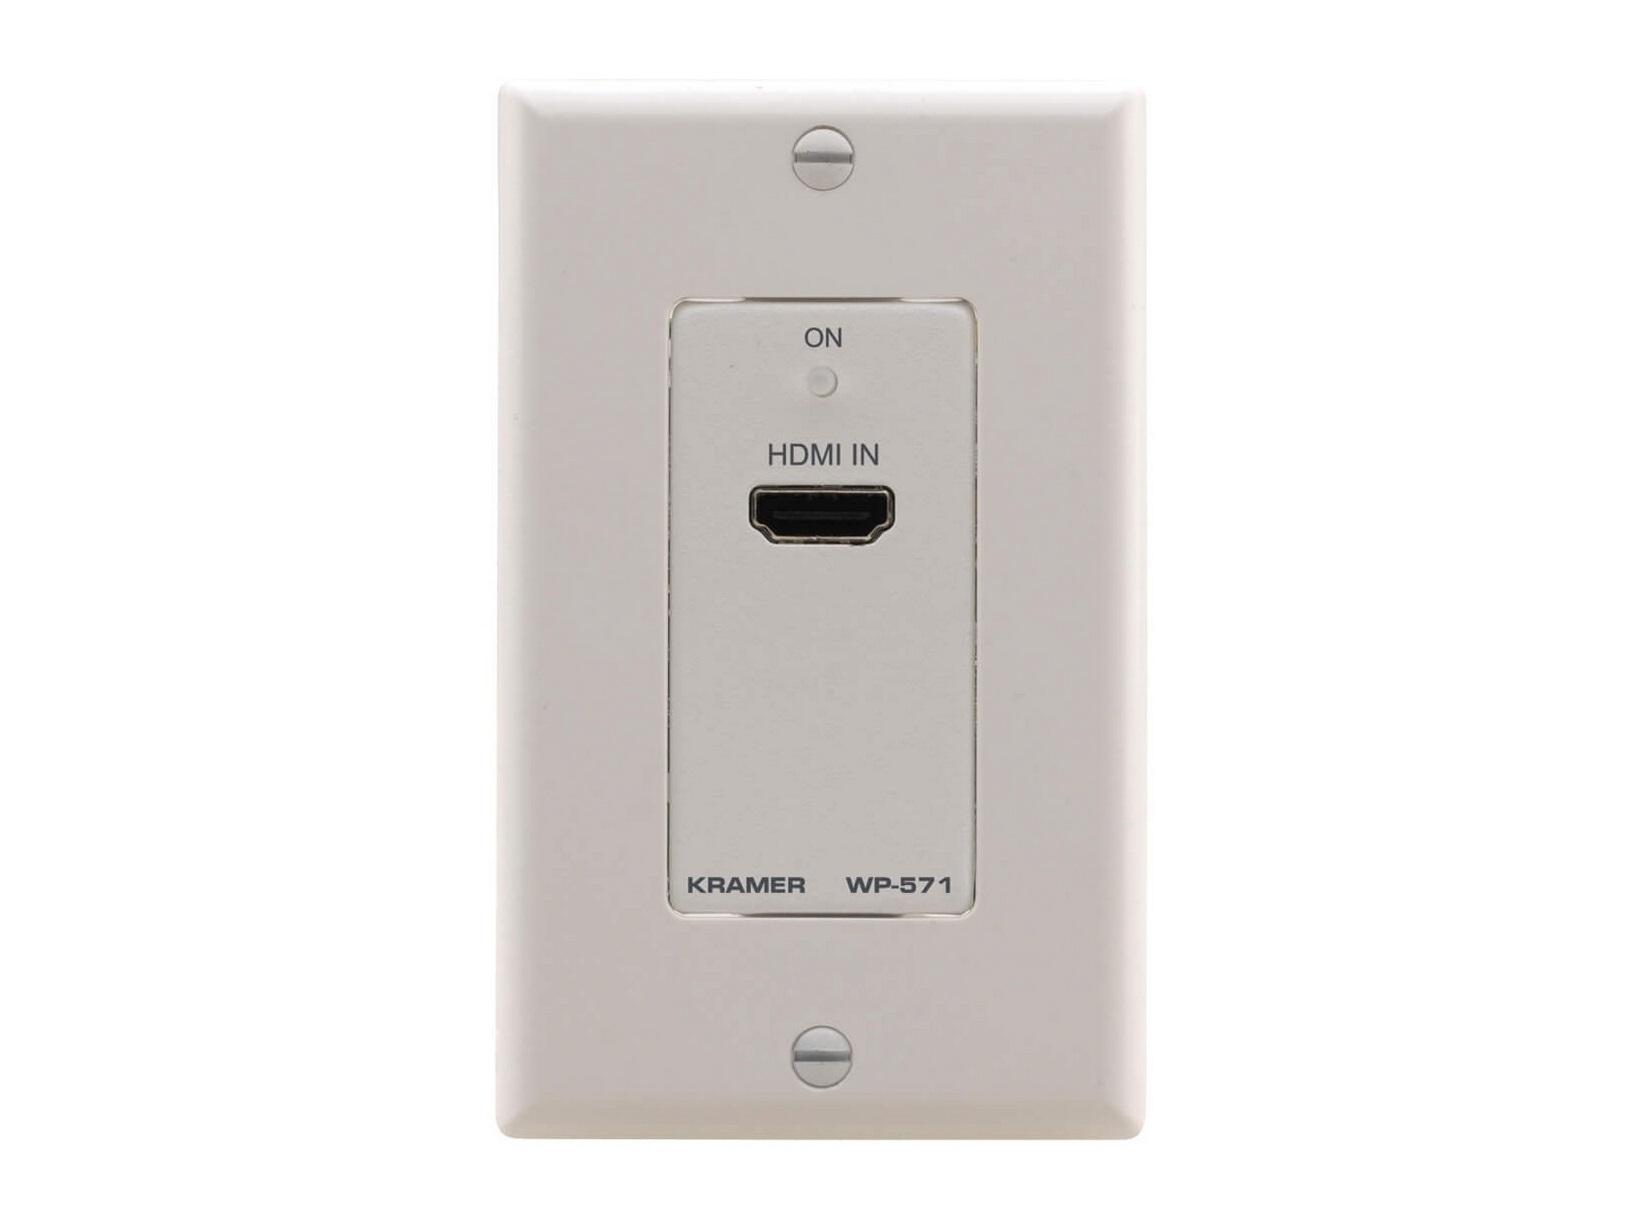 WP-571(W) Active Wall Plate HDMI over Twisted Pair Extender (Transmitter)/White by Kramer